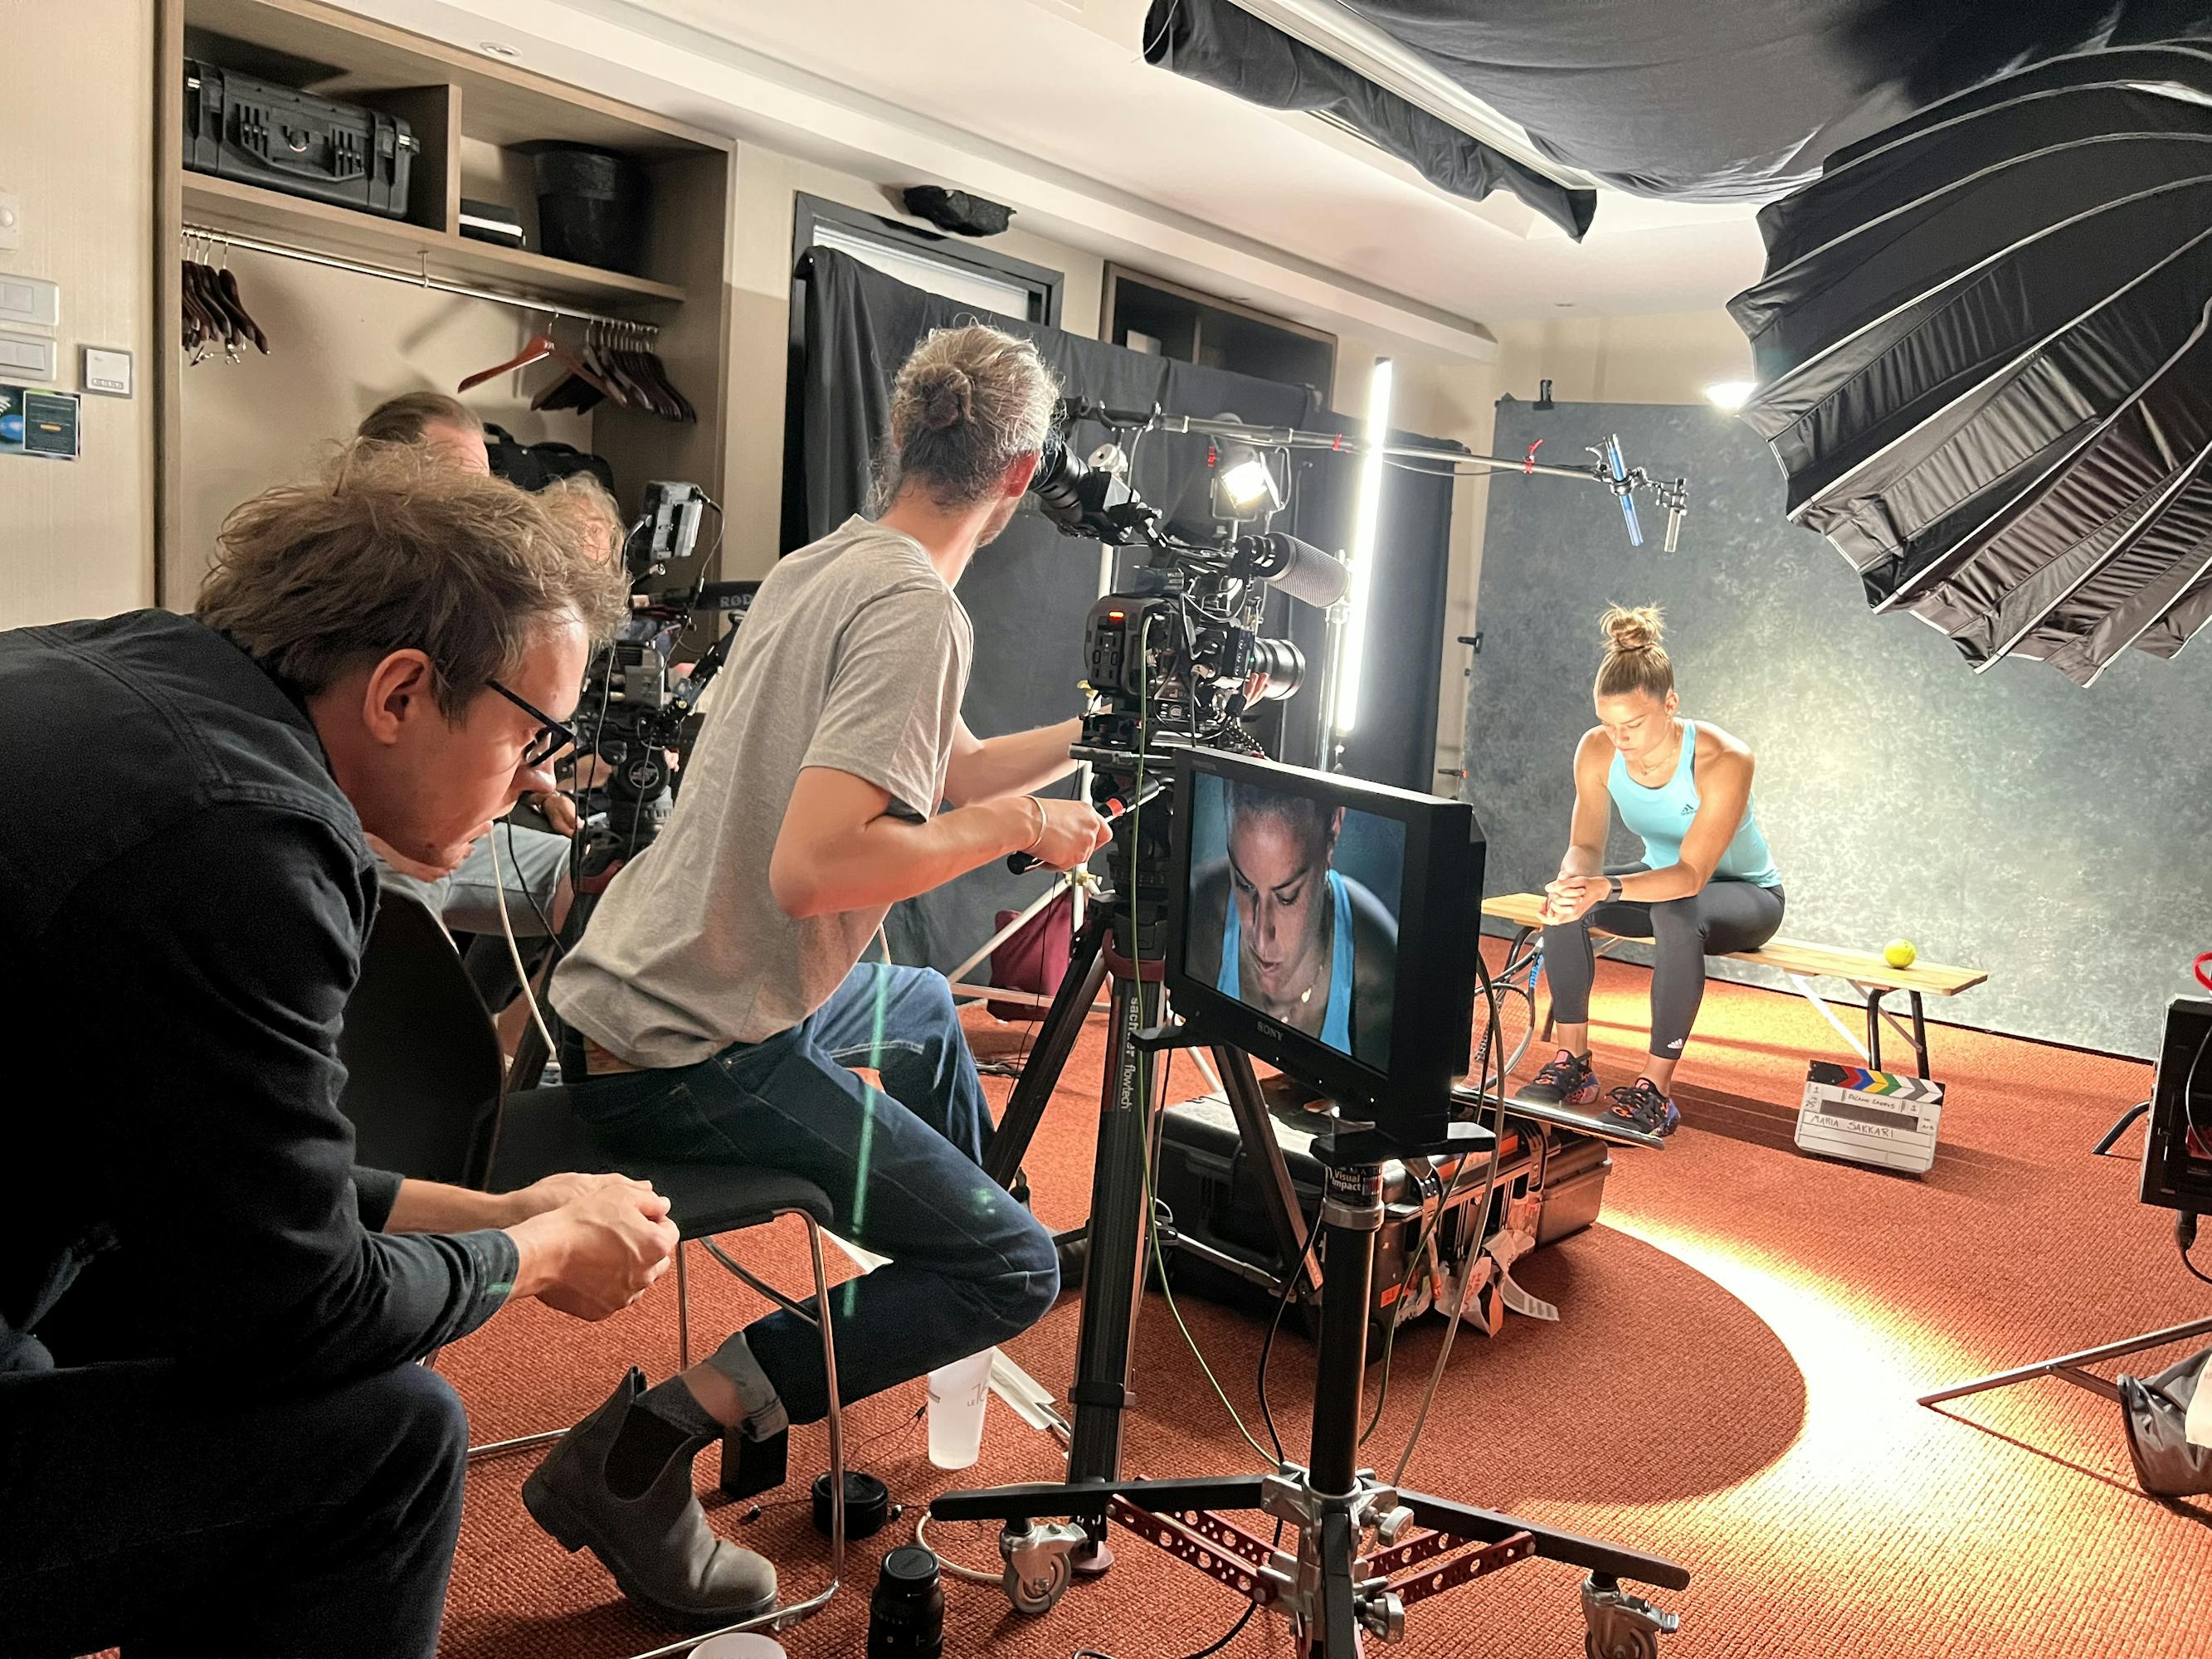 A tennis player sits on a bench in a film studio, waiting to be interviewed. She's surrounded by a production team, cameras, and other film equipment.